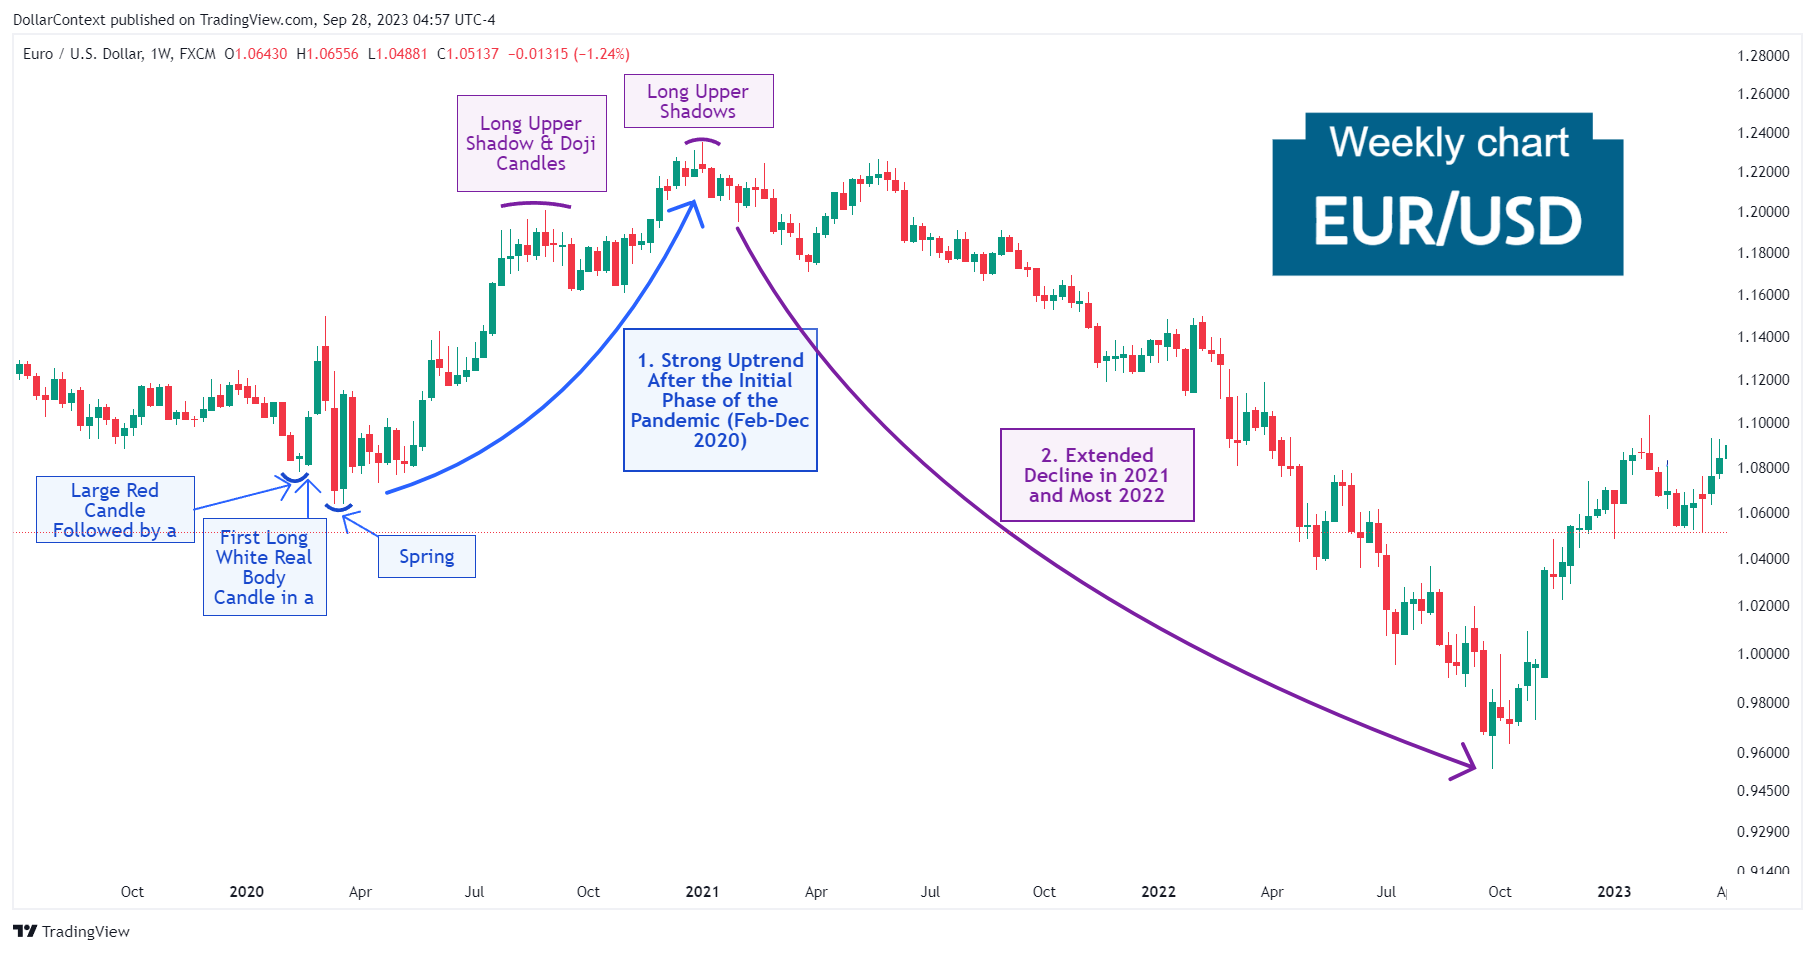 EUR/USD: Sustained Decline in 2021 and Most 2022 (Weekly Chart)